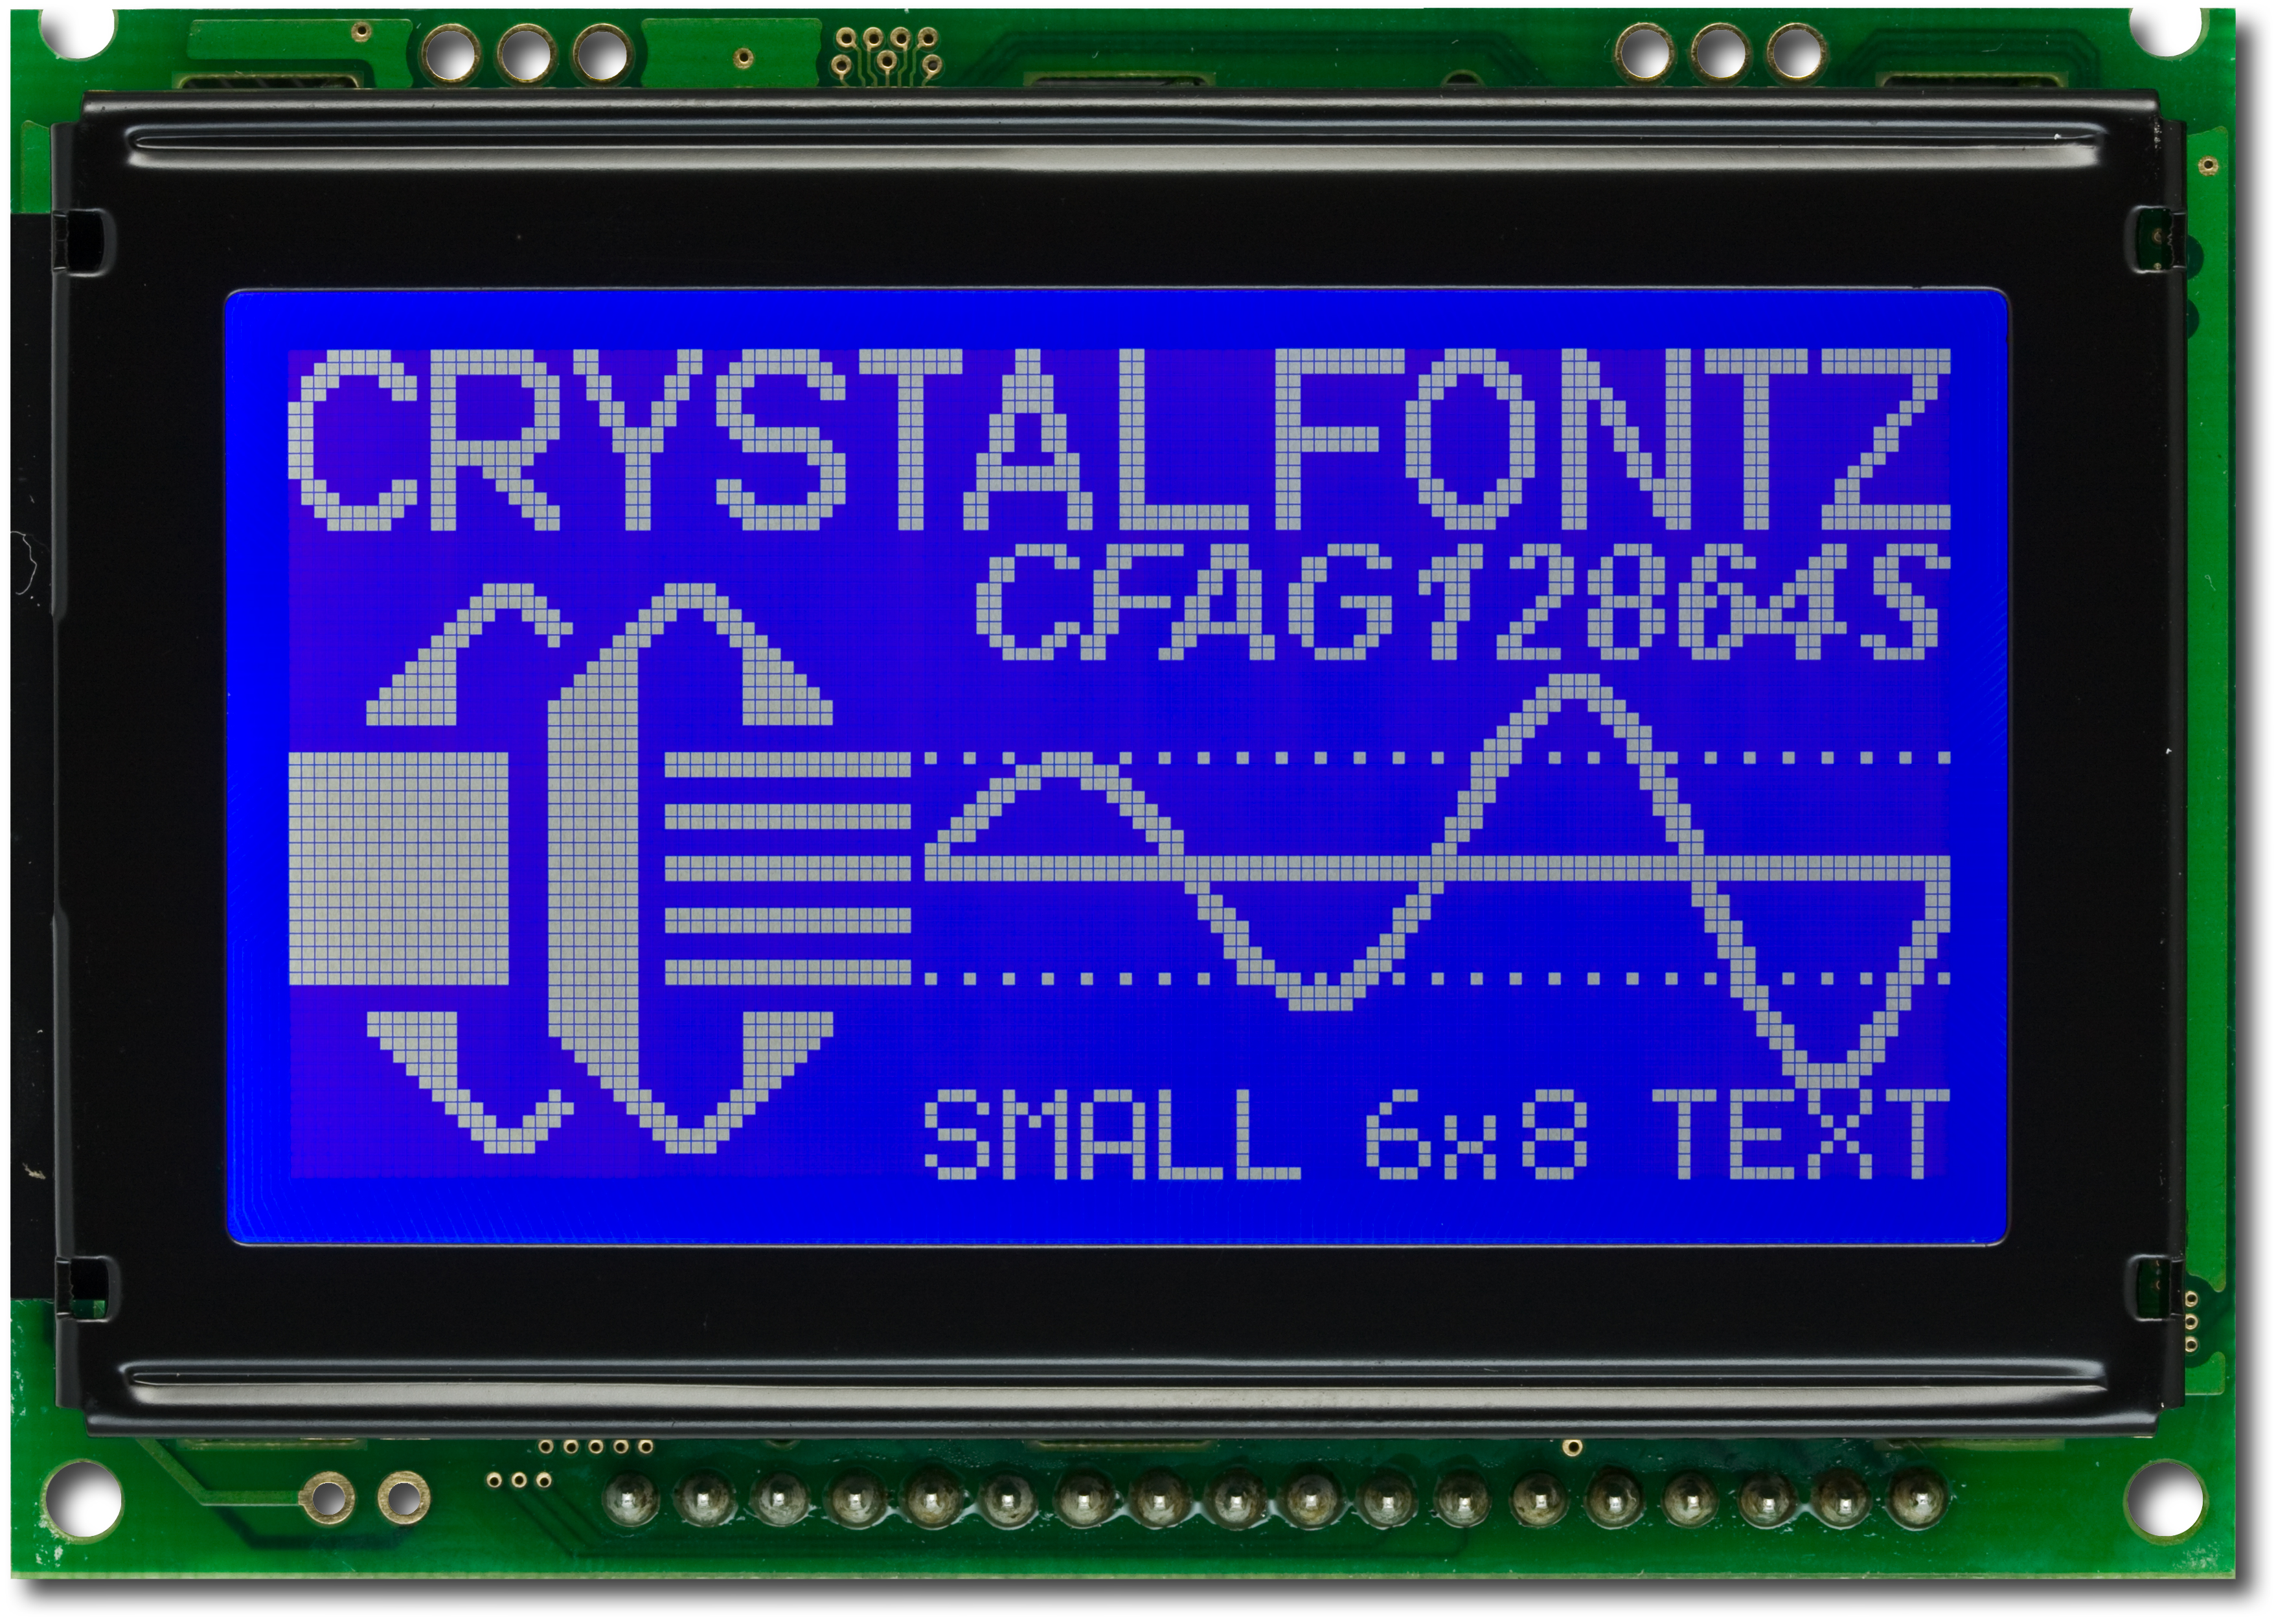 128x64 Graphic LCD Module Display,ST7920 Controller,Paraller+Serial Interface